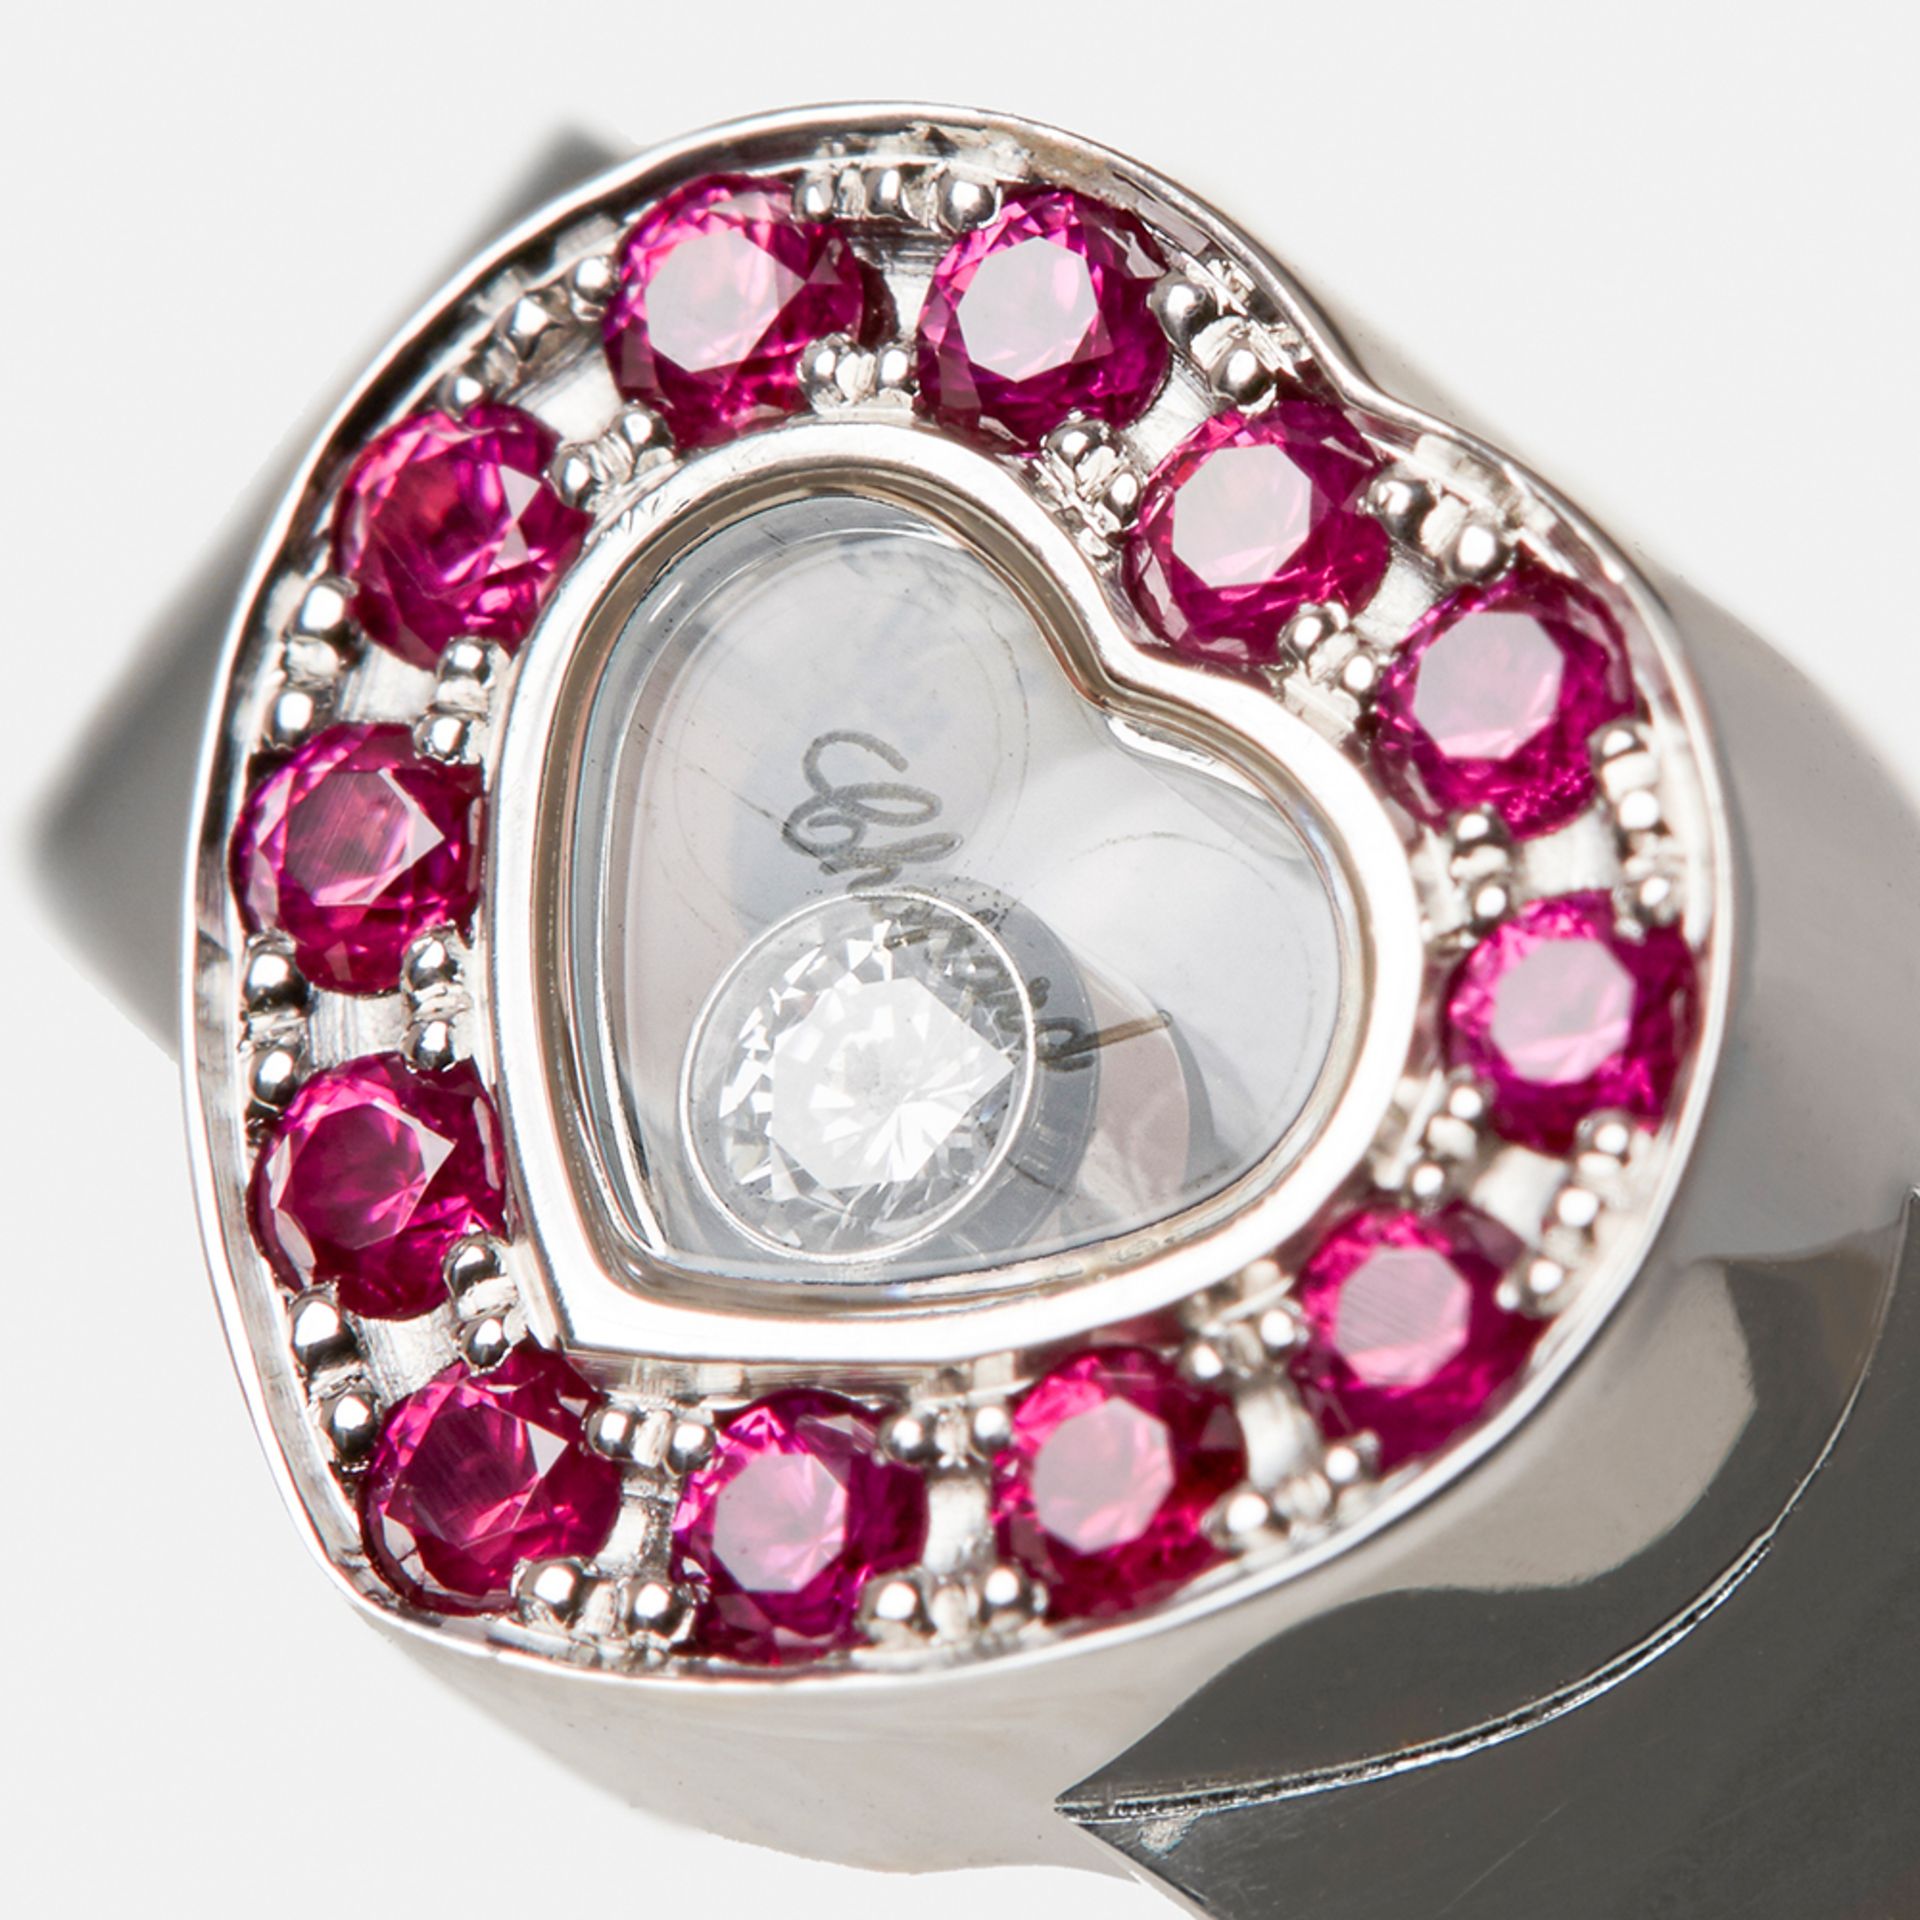 Chopard 18k White Gold Happy Diamonds Ruby Ring - Image 5 of 7